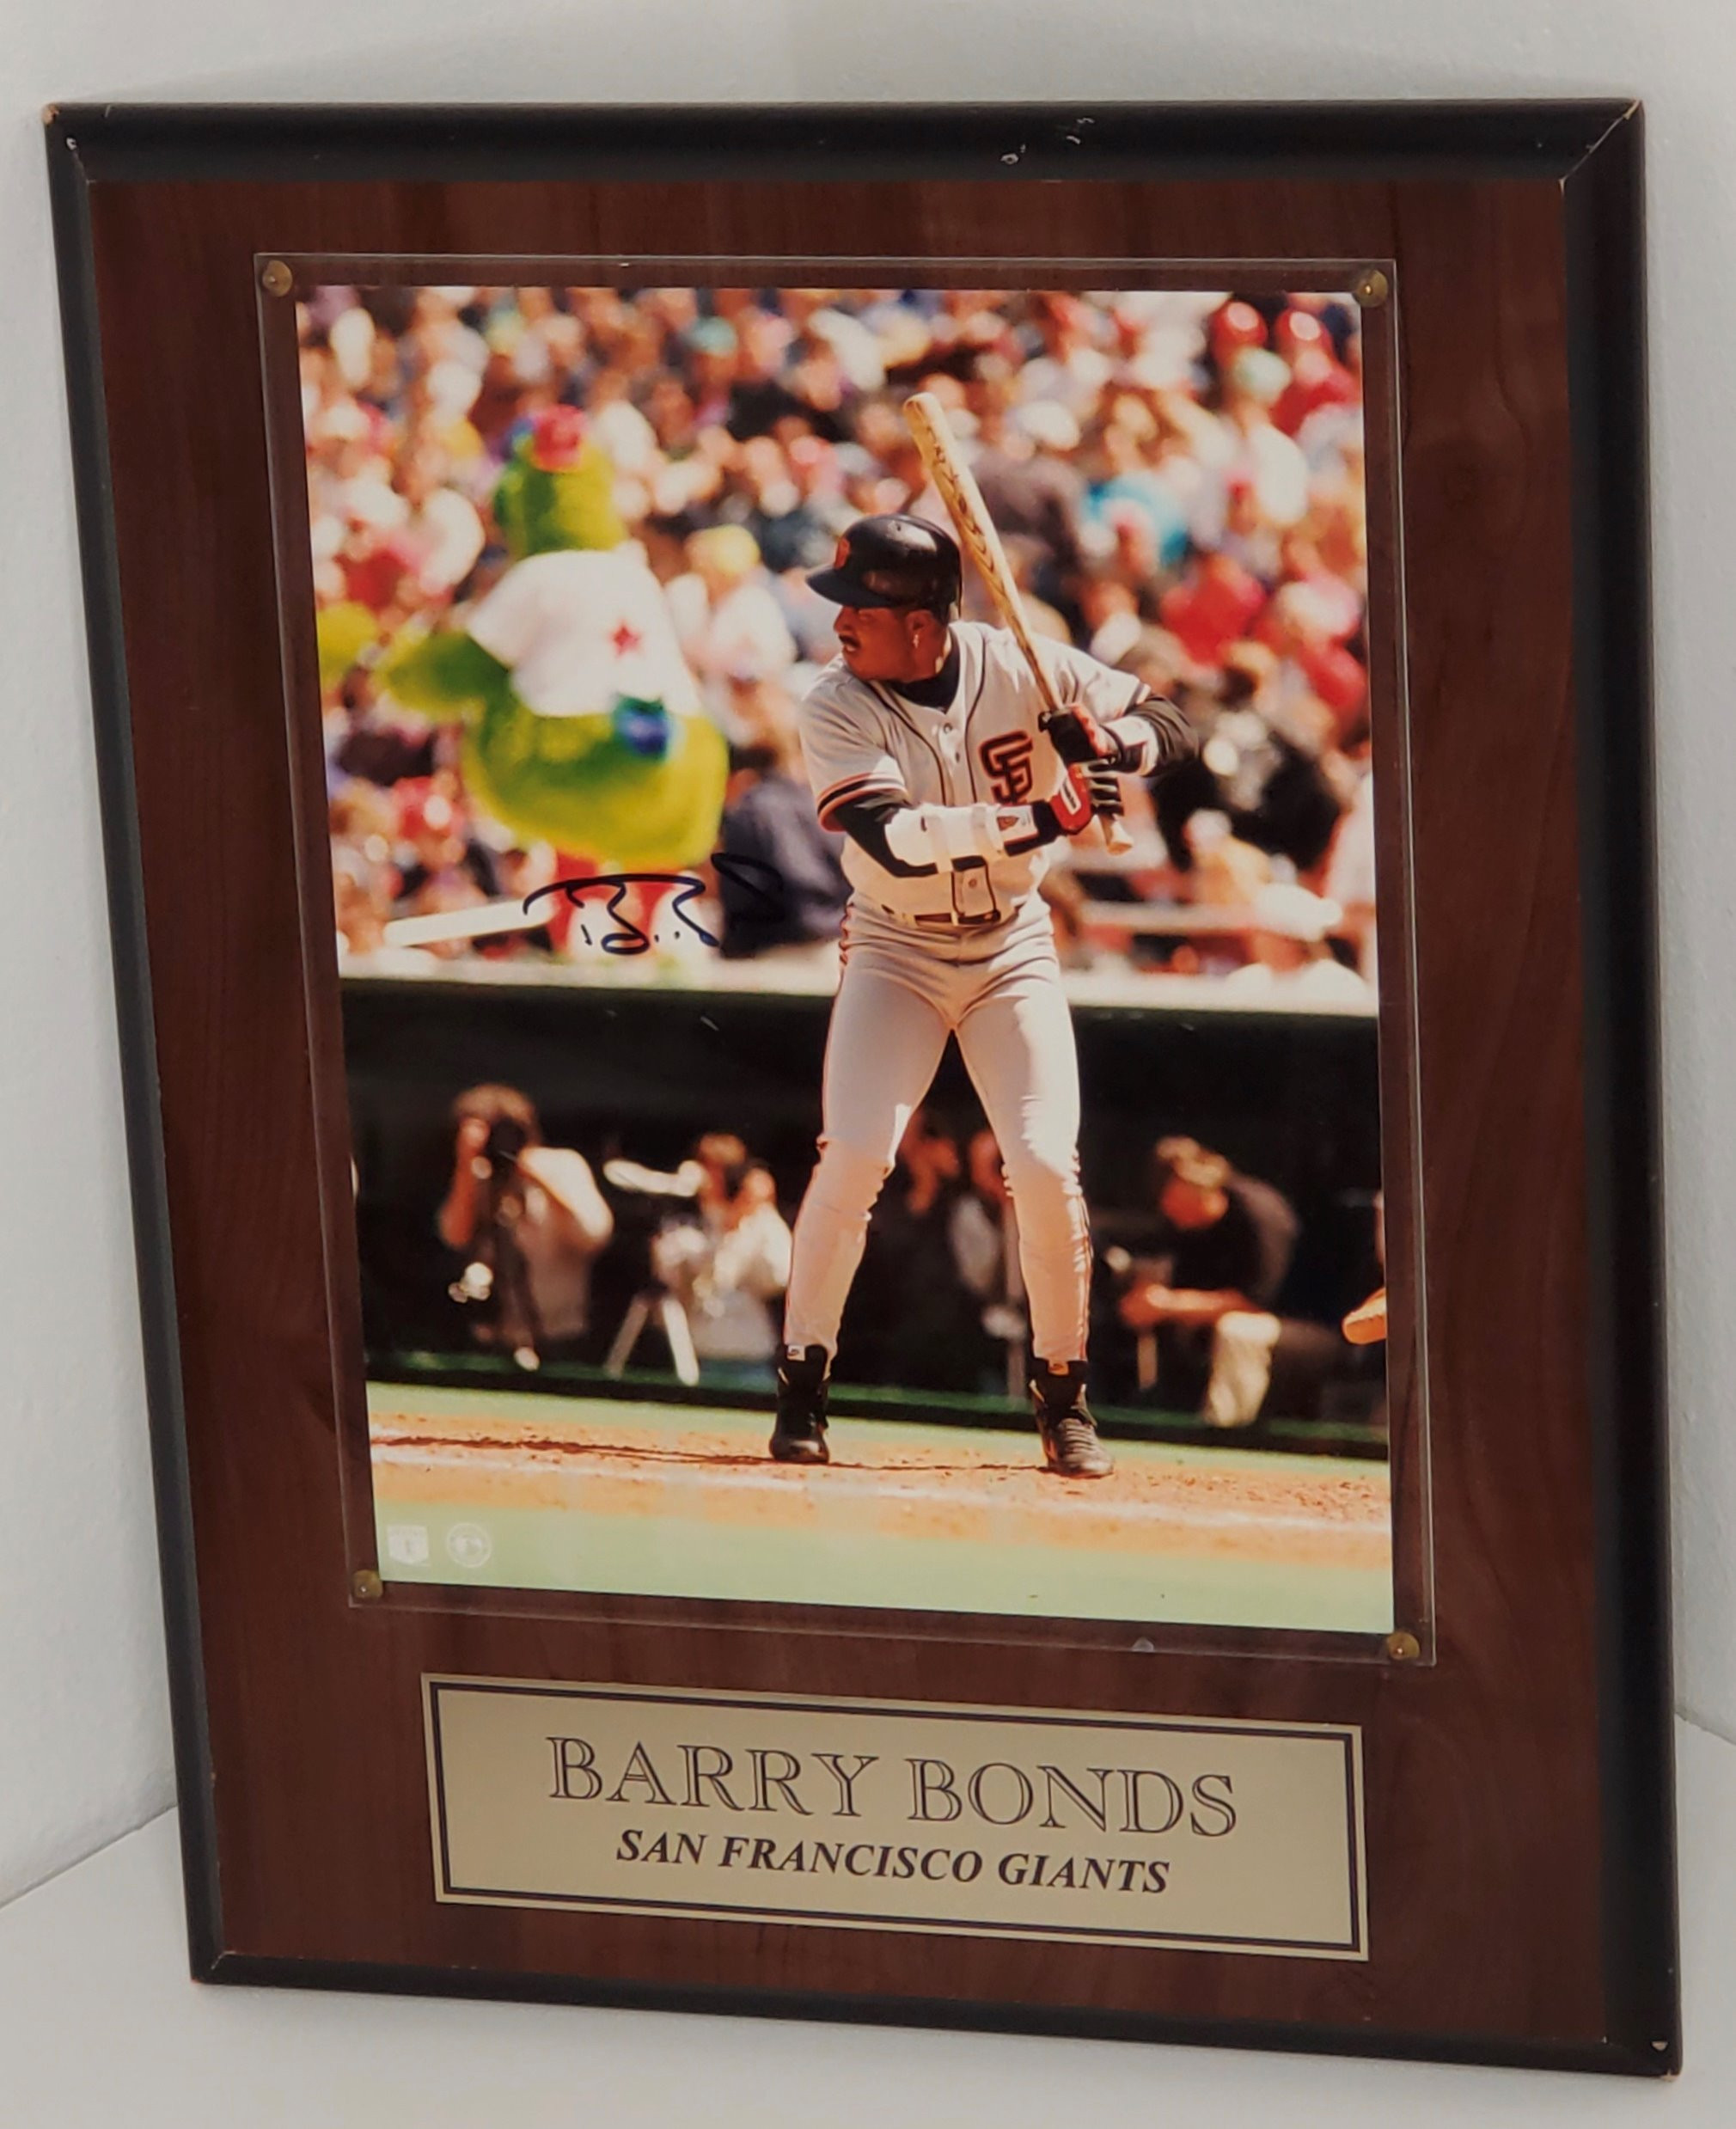 Autographed photo of seven time MVP Barry Bonds. The photo is mounted on a wooden plaque with an engraving that reads, "Barry Bonds, San Francisco Giants." Item includes certificate of authenticity.